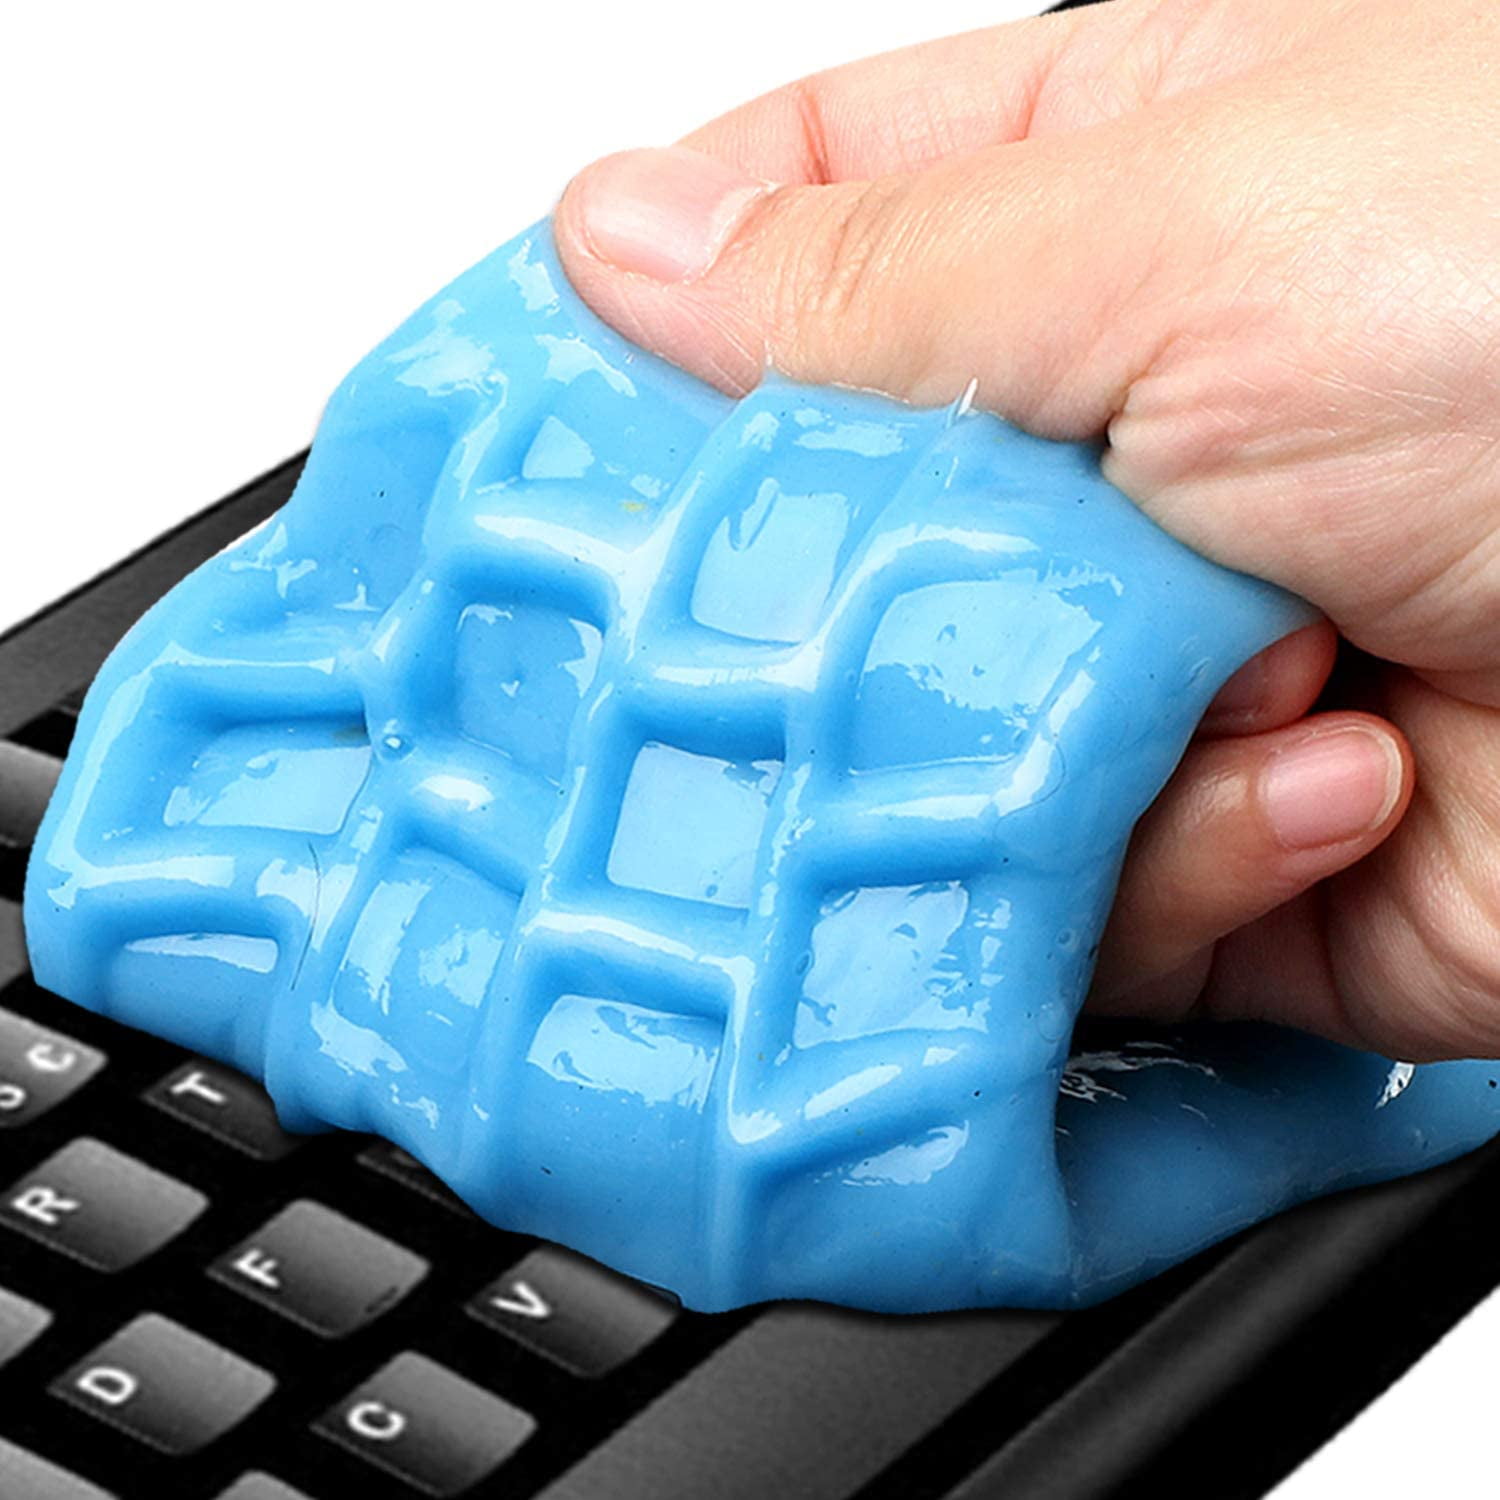 Cleaning the keyboard with gel cleaners : r/CleaningTips